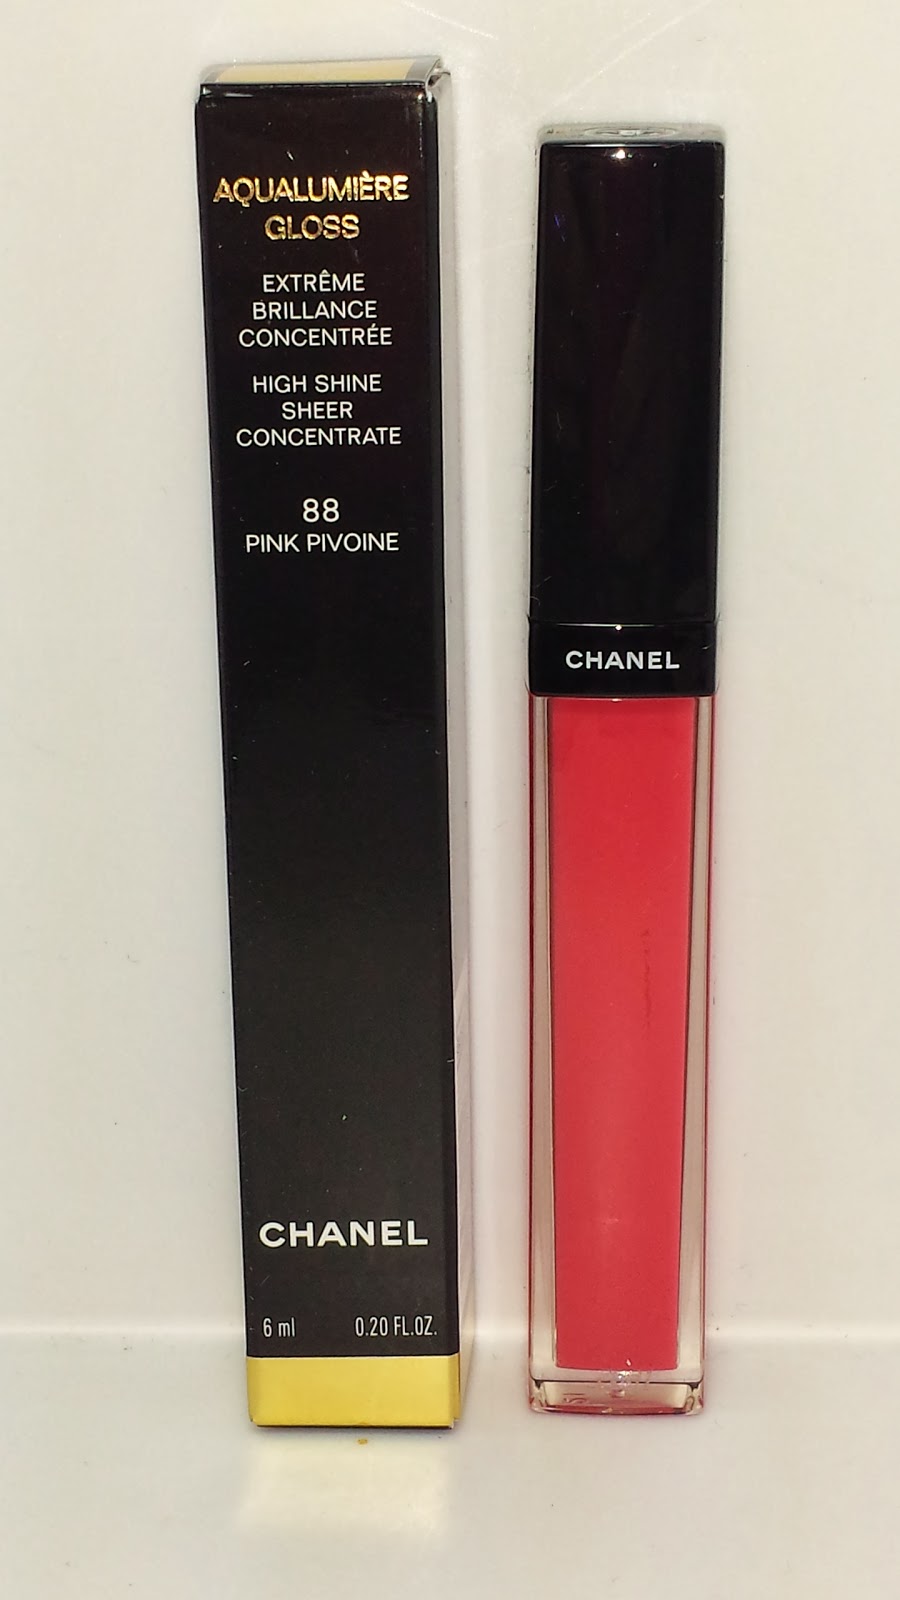 Chanel Aqualumiere Gloss High Shine Sheer Concentrate - Pink Pivoine No. 88